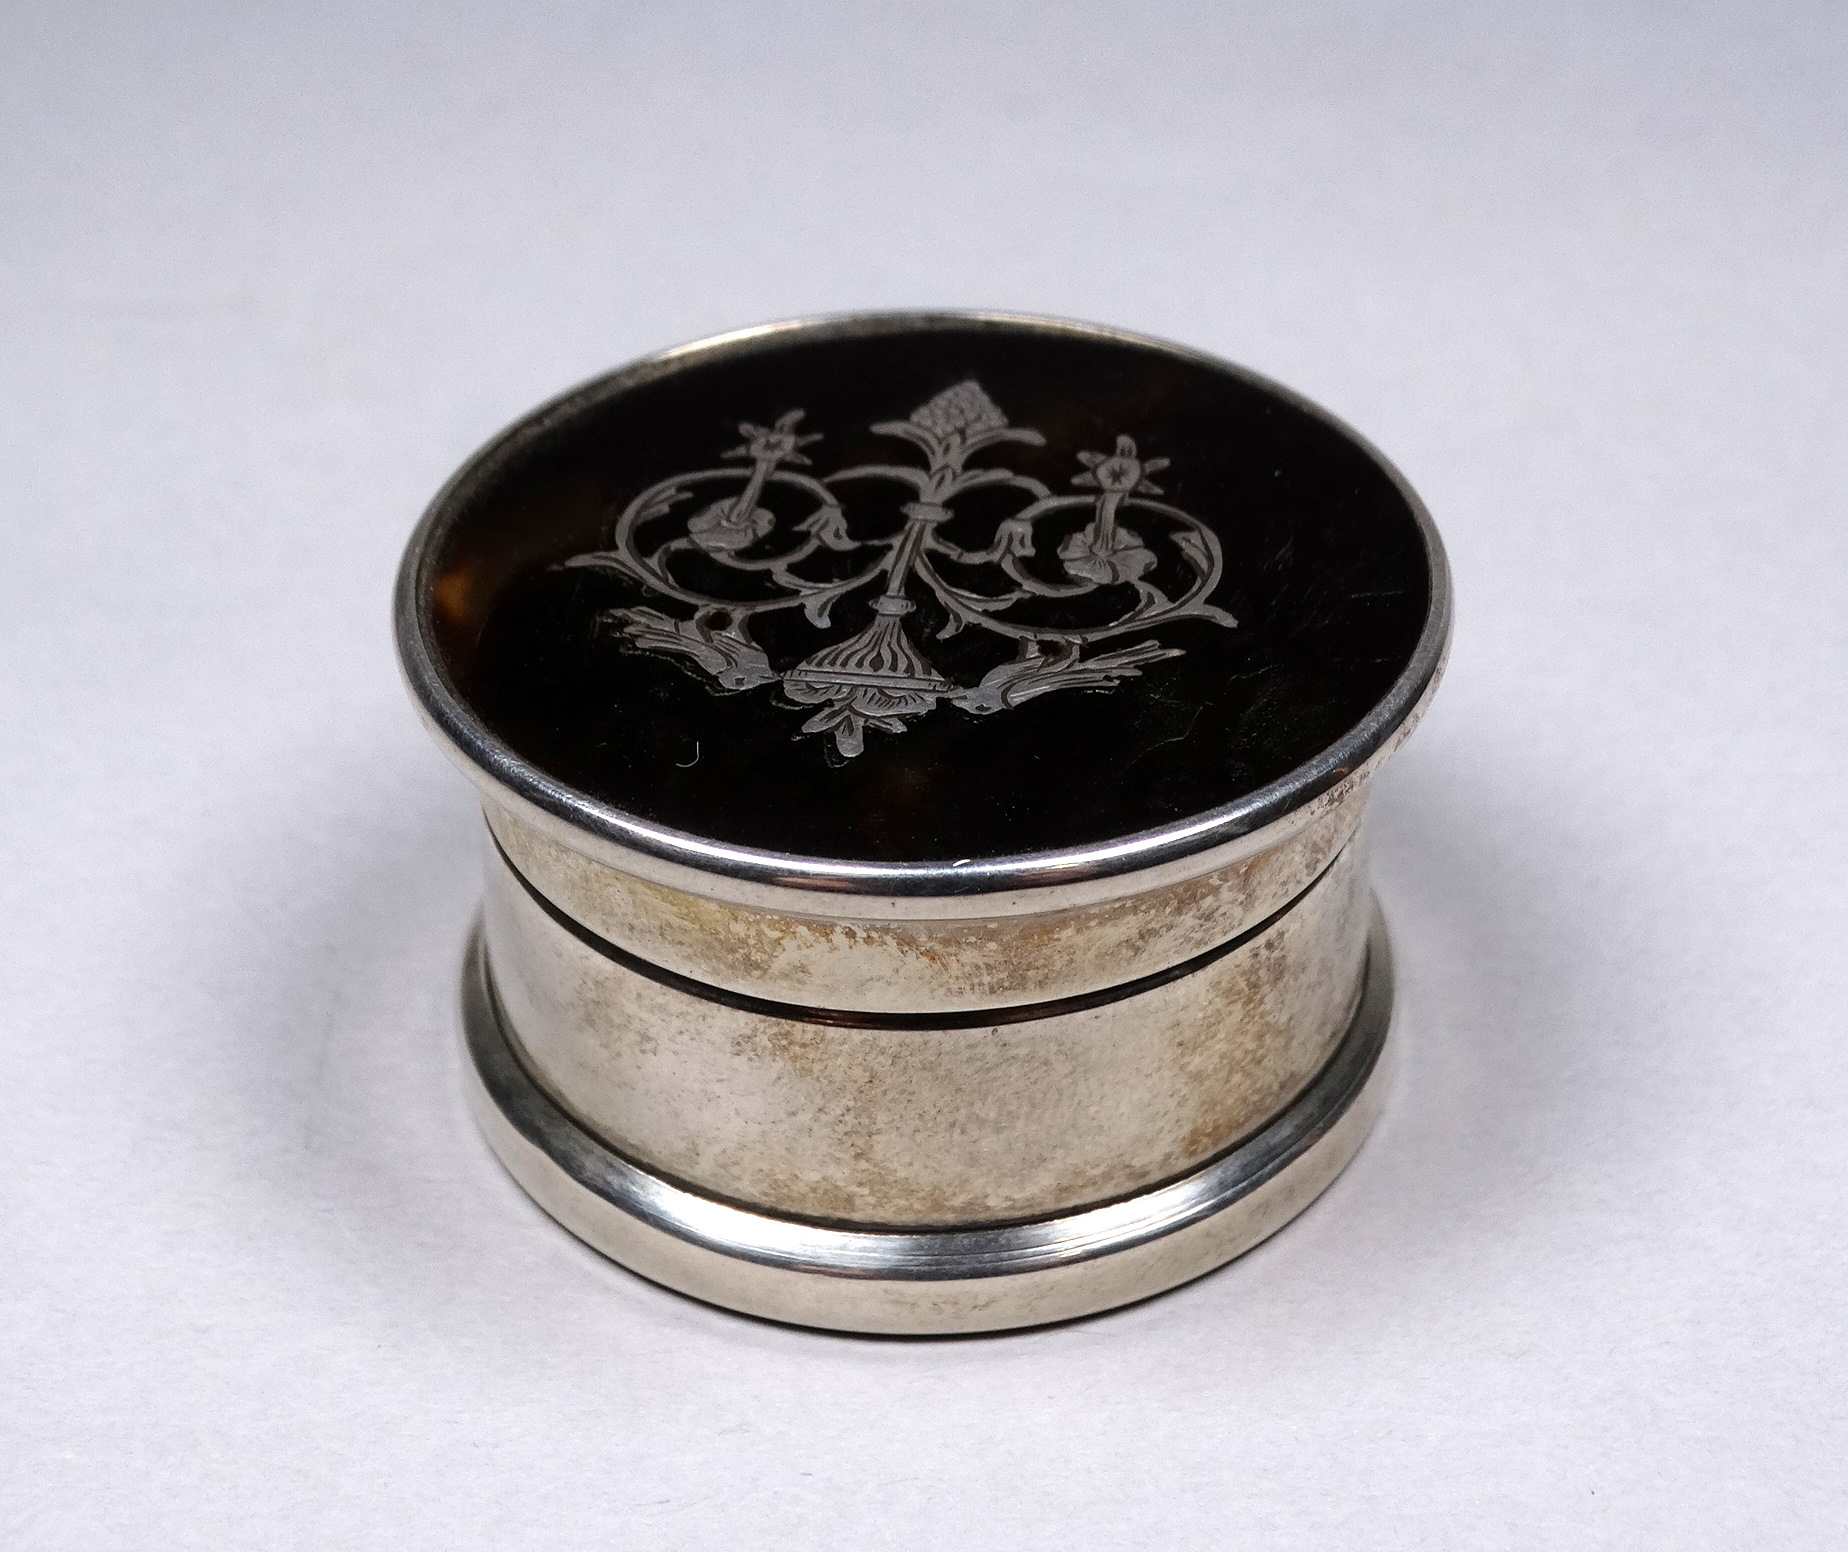 A silver pill box - Birmingham 1917, circular with a tortoiseshell top inset with birds and foliage,